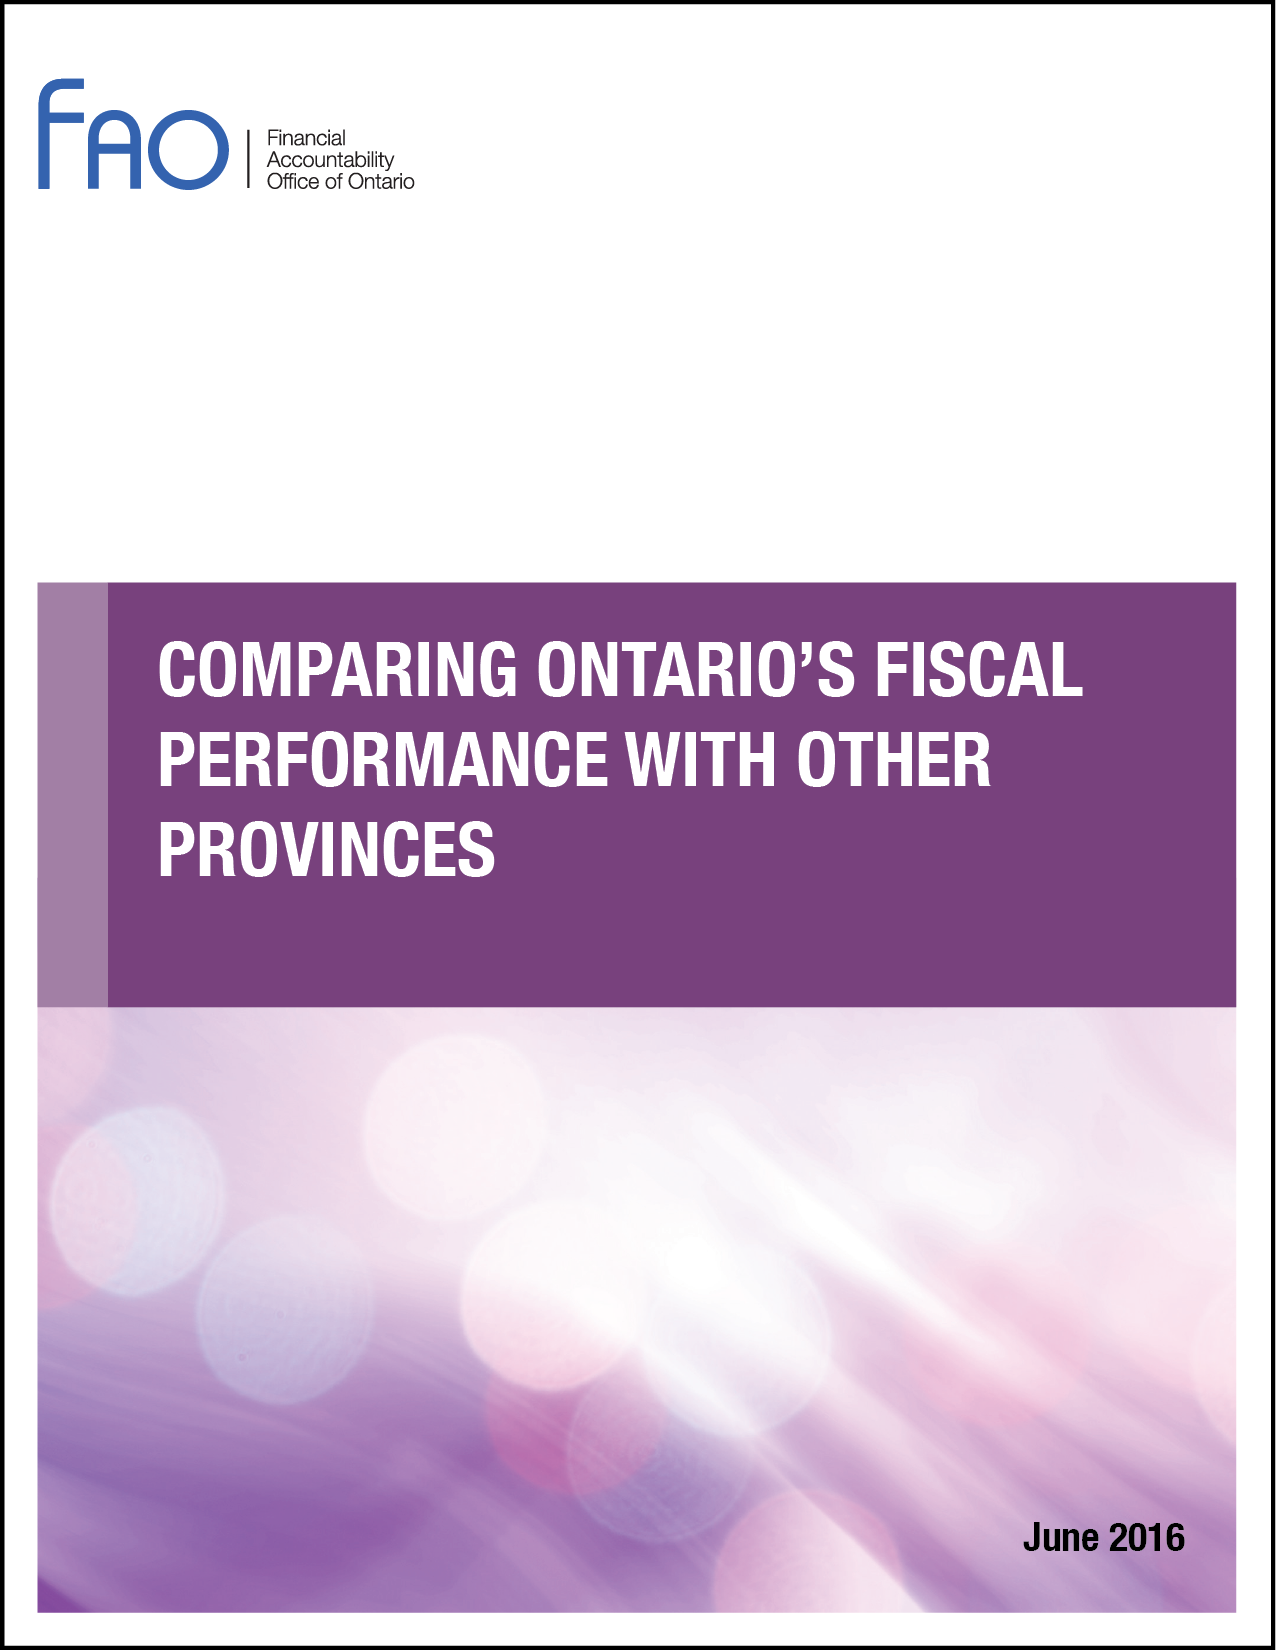 Comparing Ontario's Fiscal Performance with Other Provinces: 2014-15